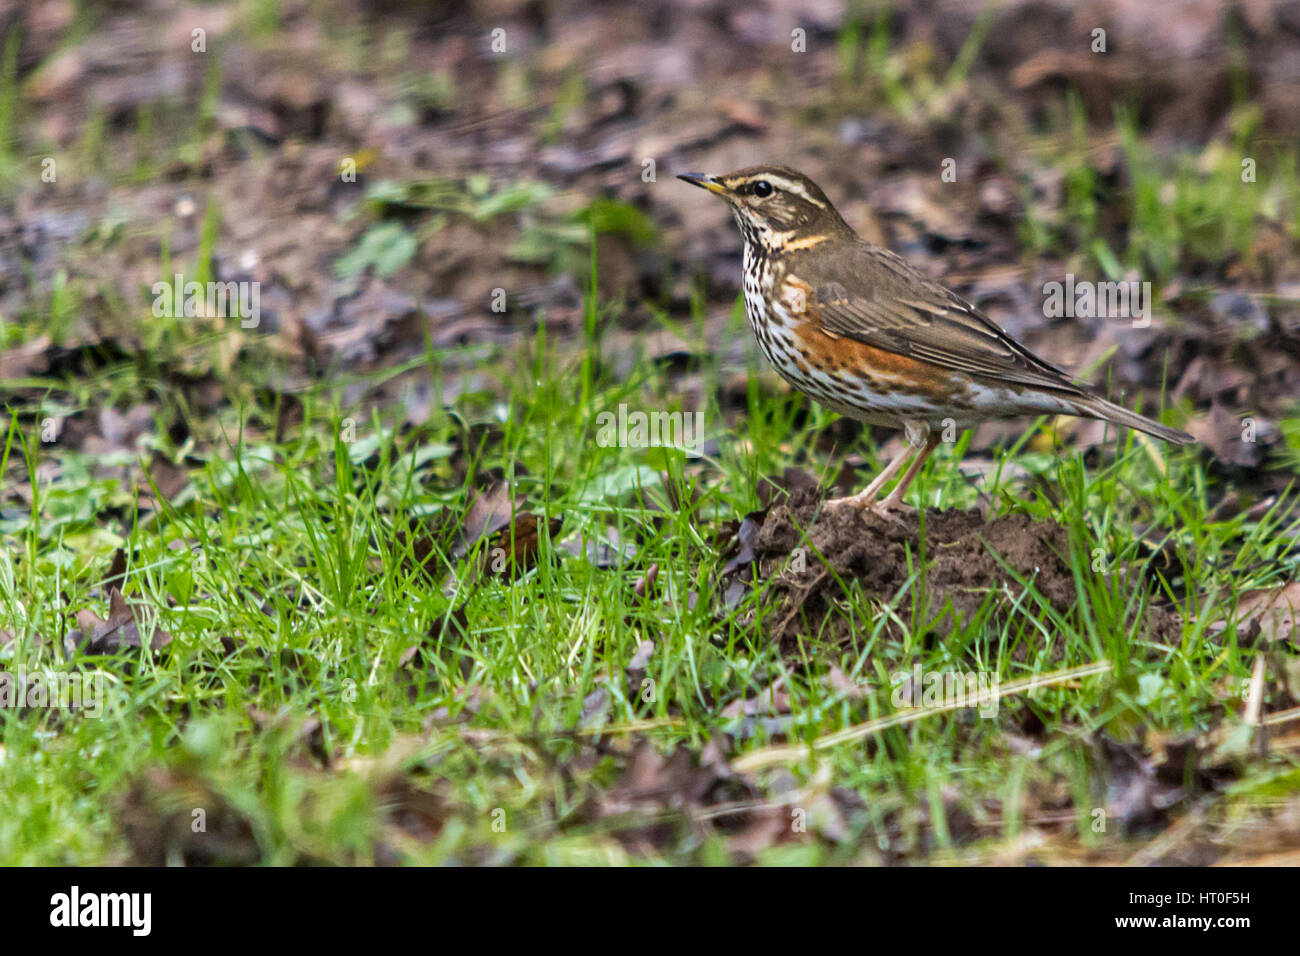 Redwing turdus Ilicus bird winter wildlife uk visitor thrush with red flanks and underwings. White stripe over eye spotted pale underparts eats worms Stock Photo